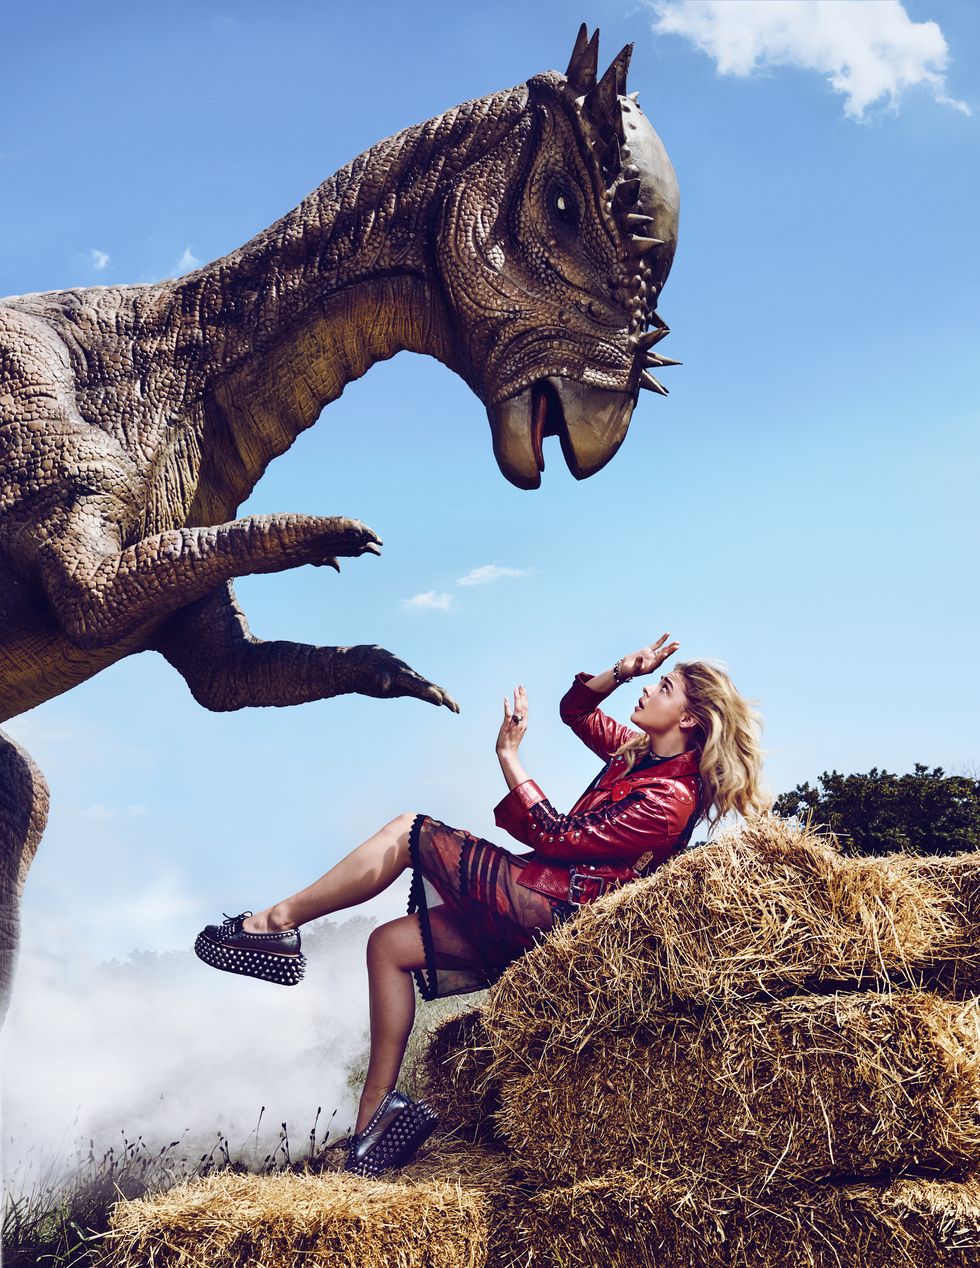 Human, Dinosaur, Photograph, People in nature, Sculpture, Jaw, Hay, Straw, Love, Fictional character, 